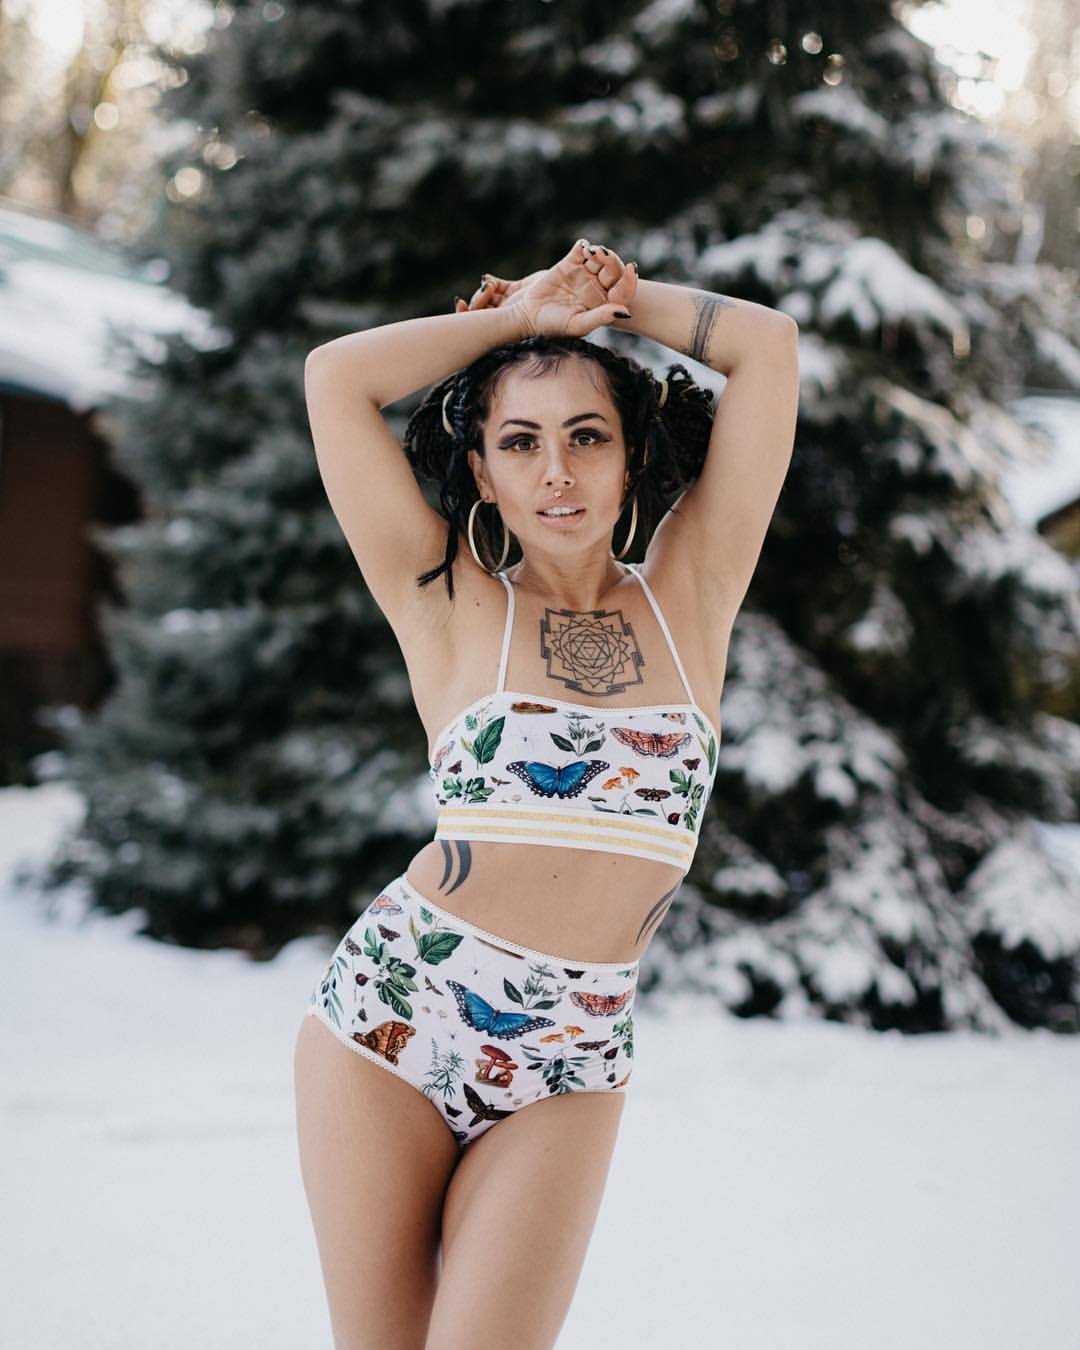 Get in the mood for Spring with @the_ritualstitch handmade lingerie by Colette Rogers. The Ritual Stitch focuses on using American sourced organic textiles, vintage re-circular fabrics, and hand painted-designs. Every item is designed and stitched in...